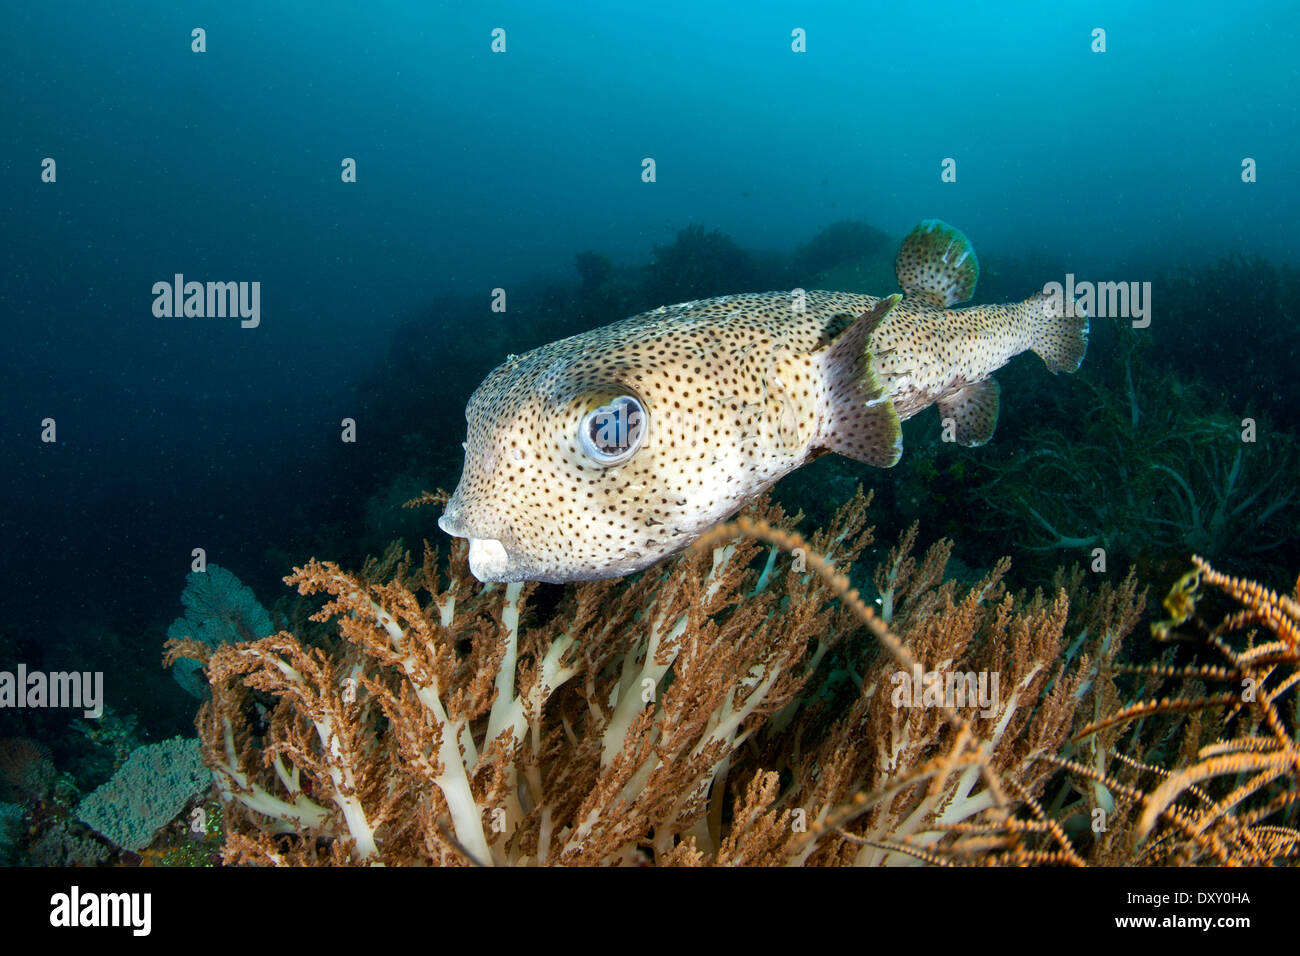 Spotted Porcupinefish, Diodon hystrix, Raja Ampat, West Papua, Indonesia Stock Photo